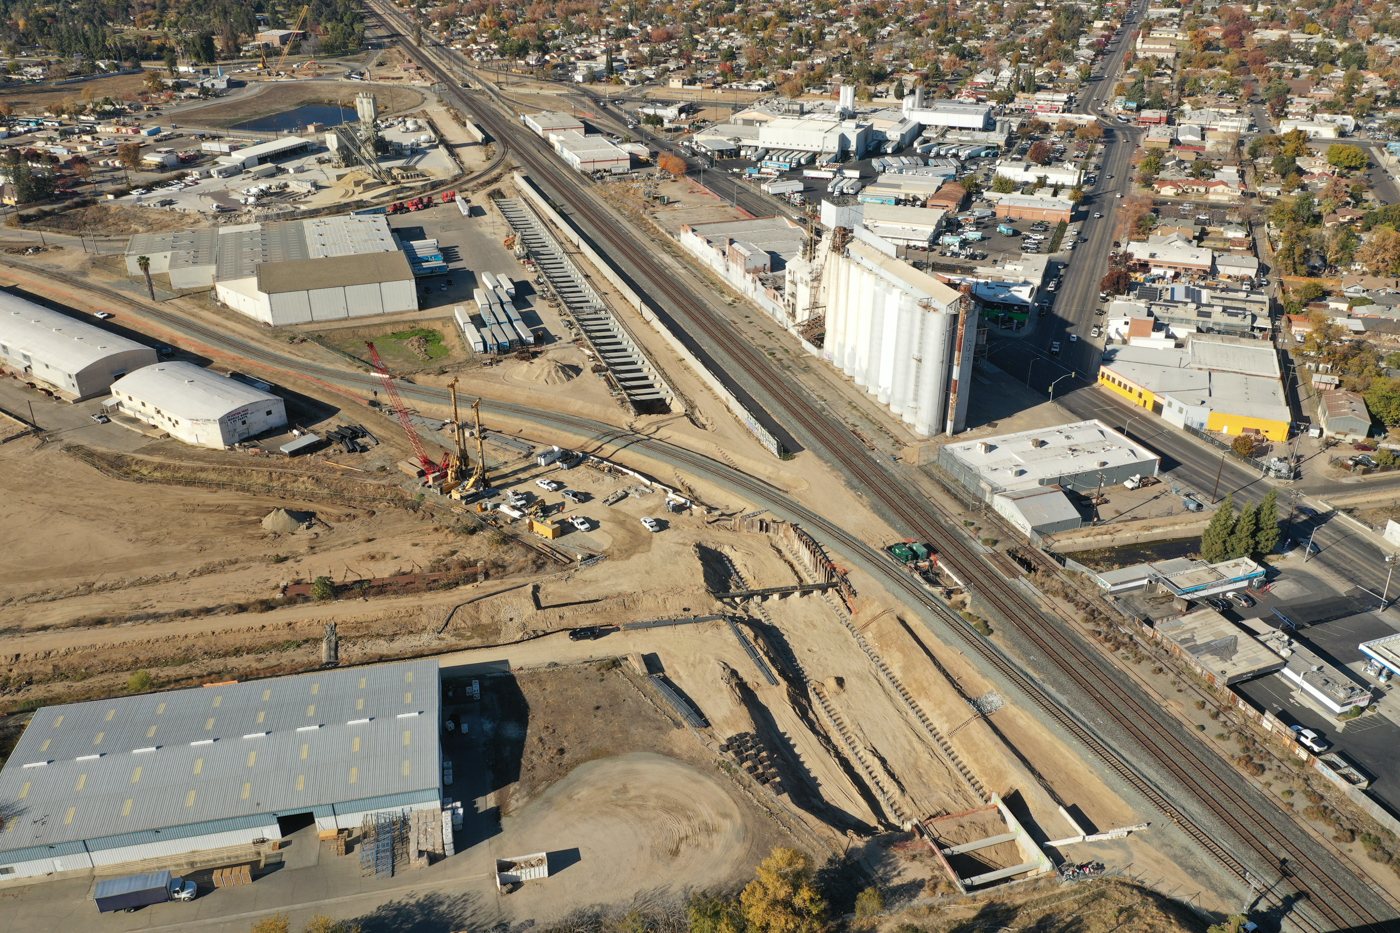 Fresno Trench & State Route 180 Passageway (drone video)